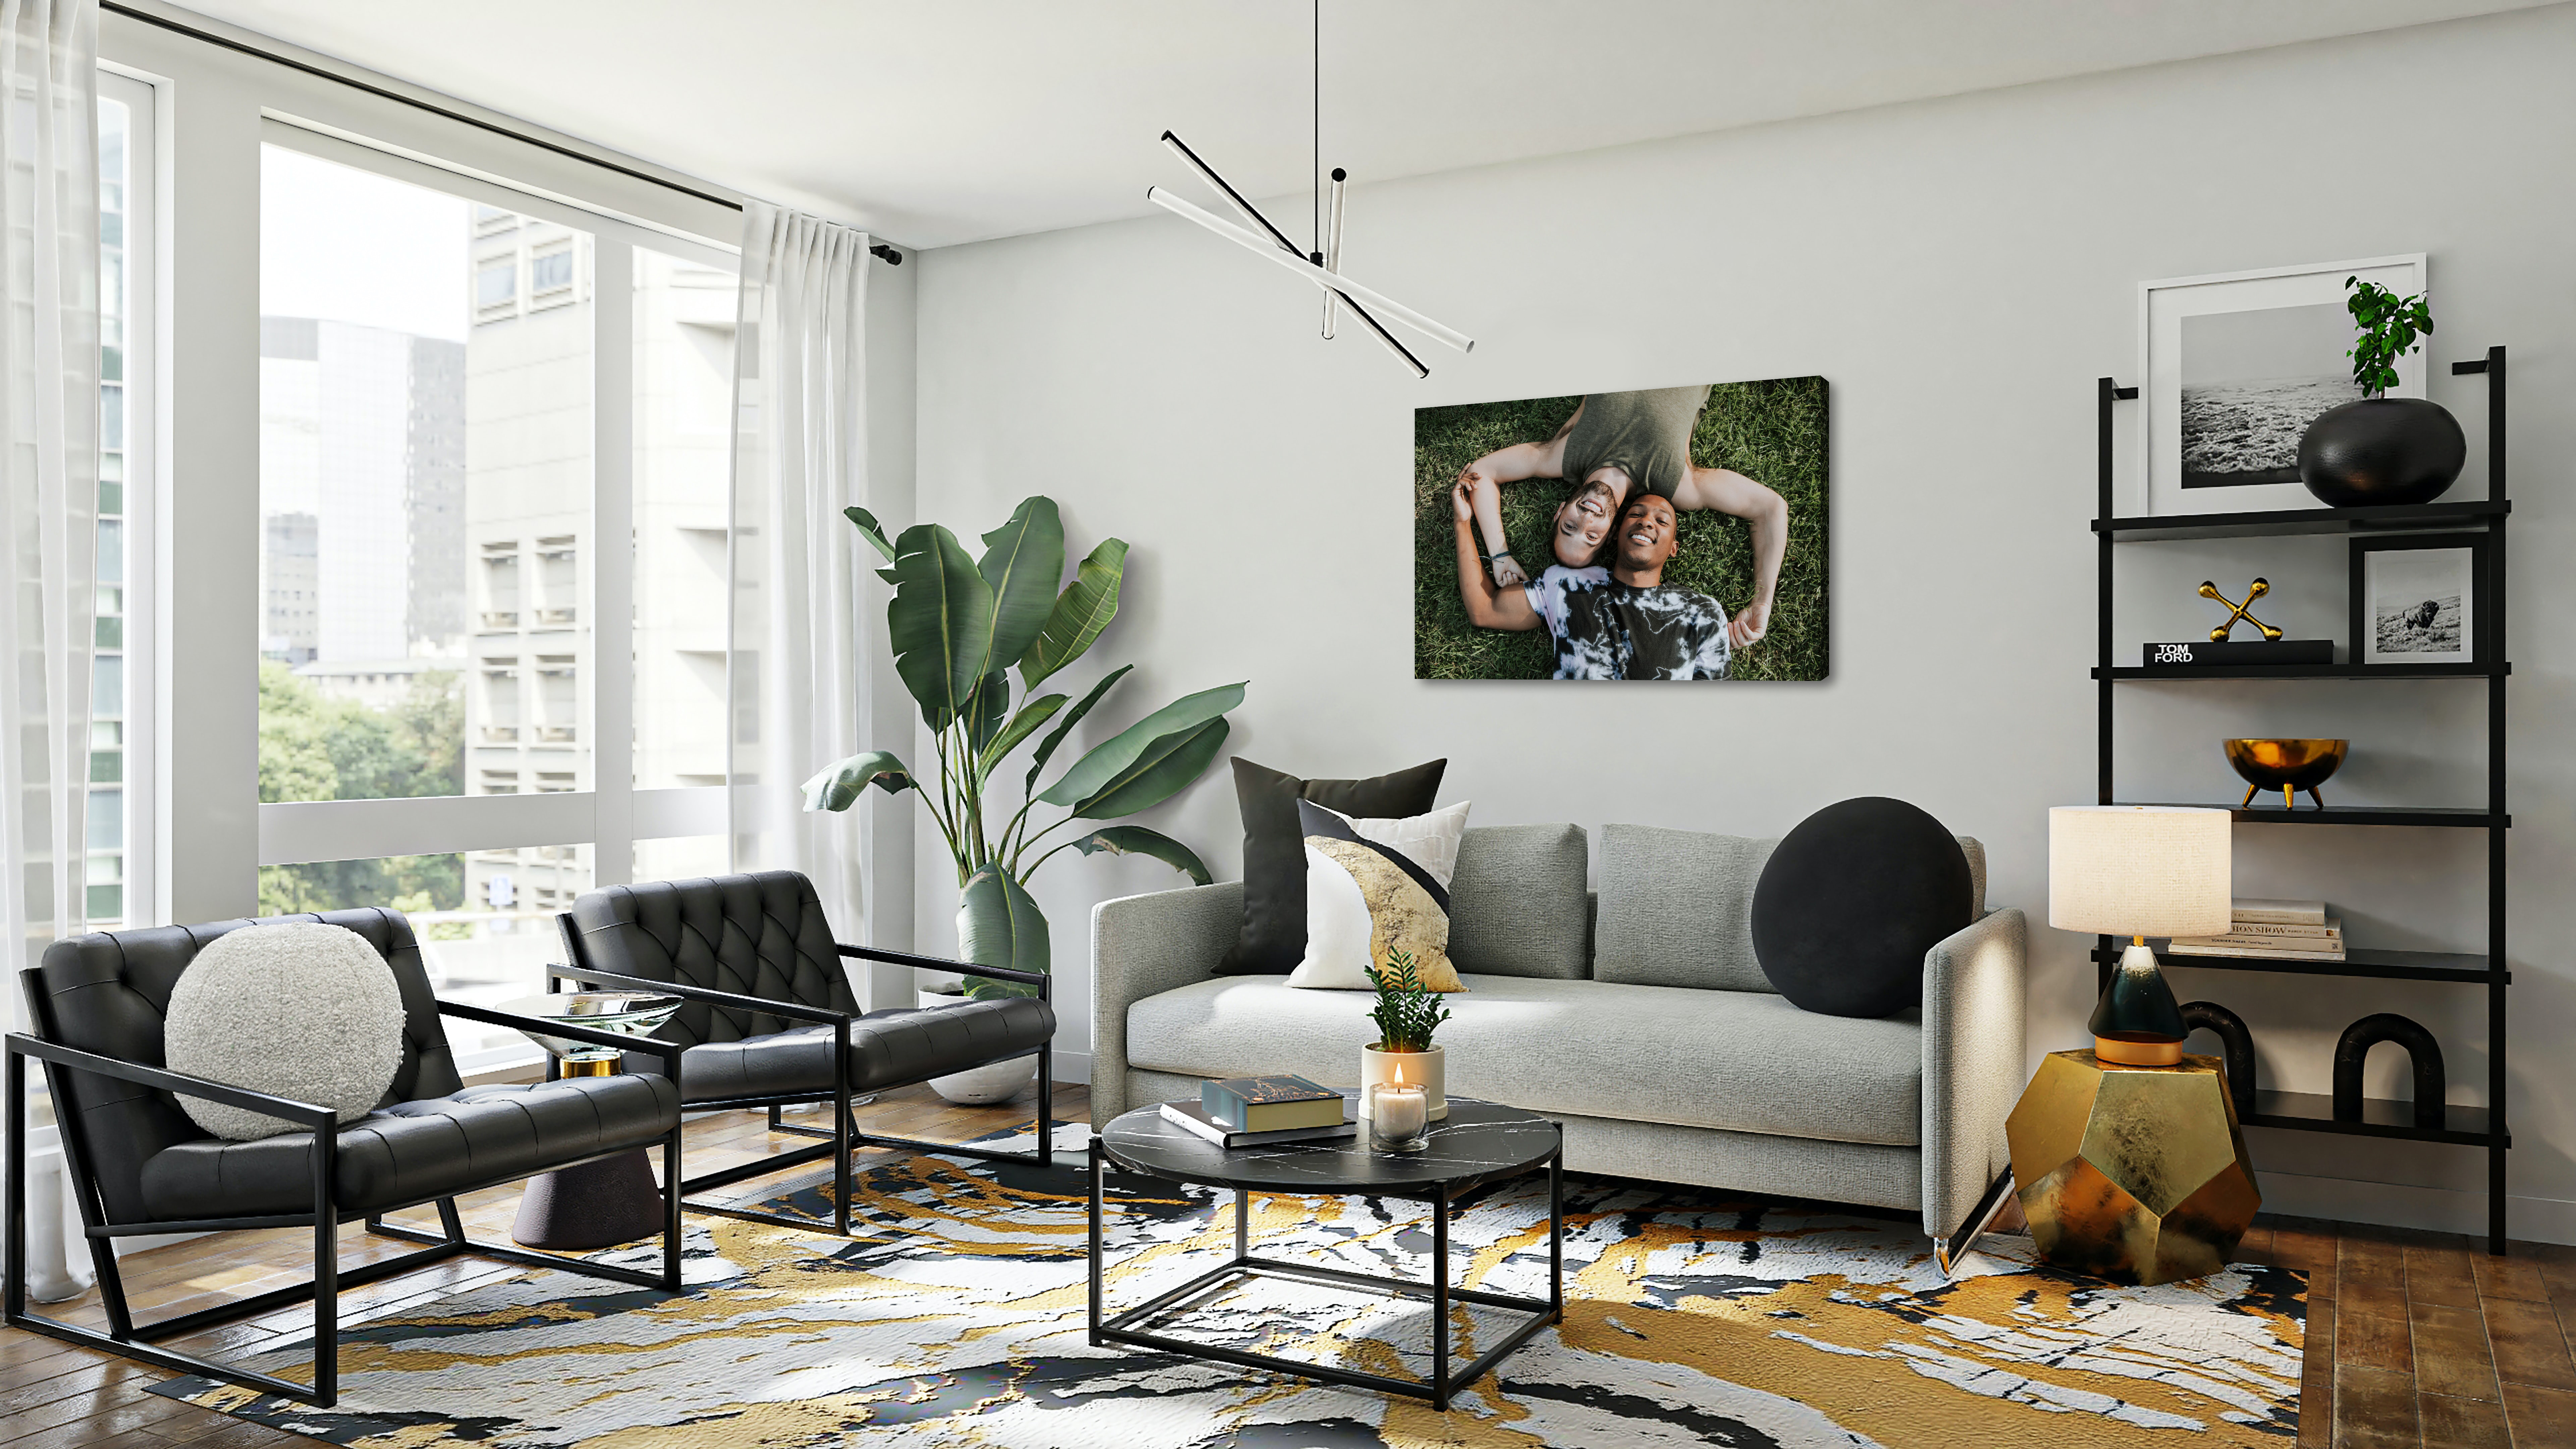 Canvas print of friends in living room